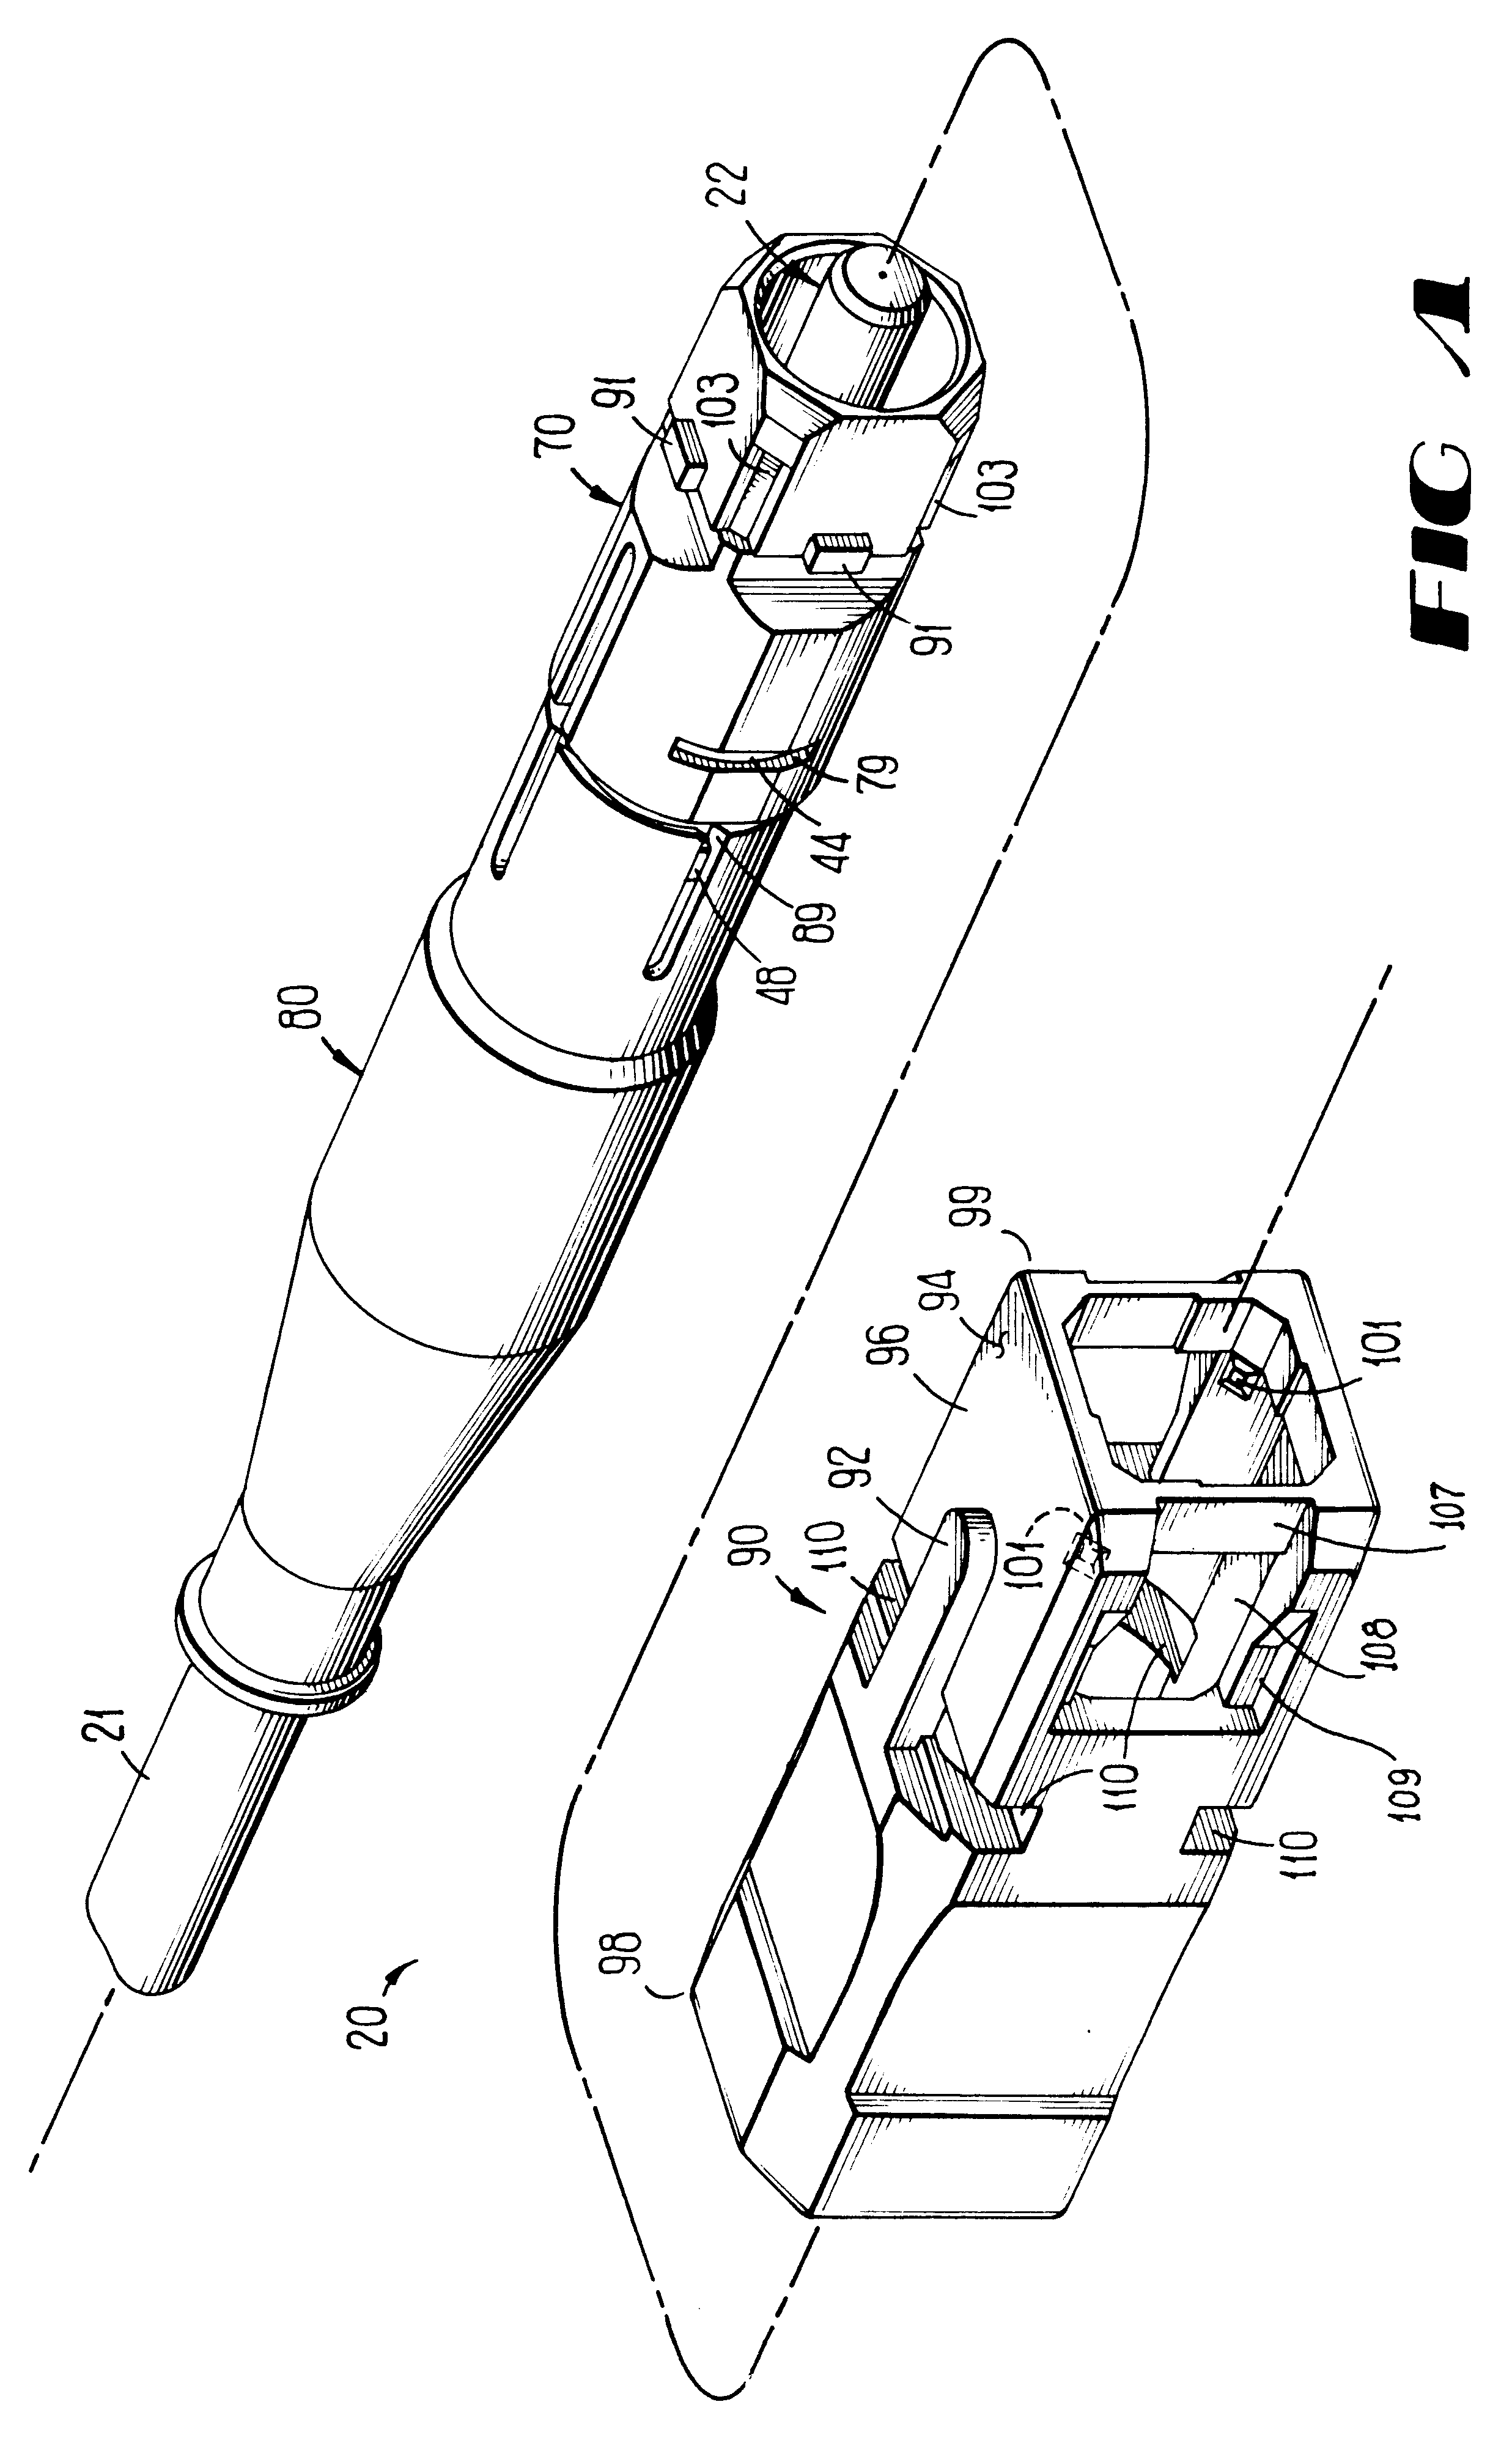 Optical fiber ferrule connector having enhanced provisions for tuning